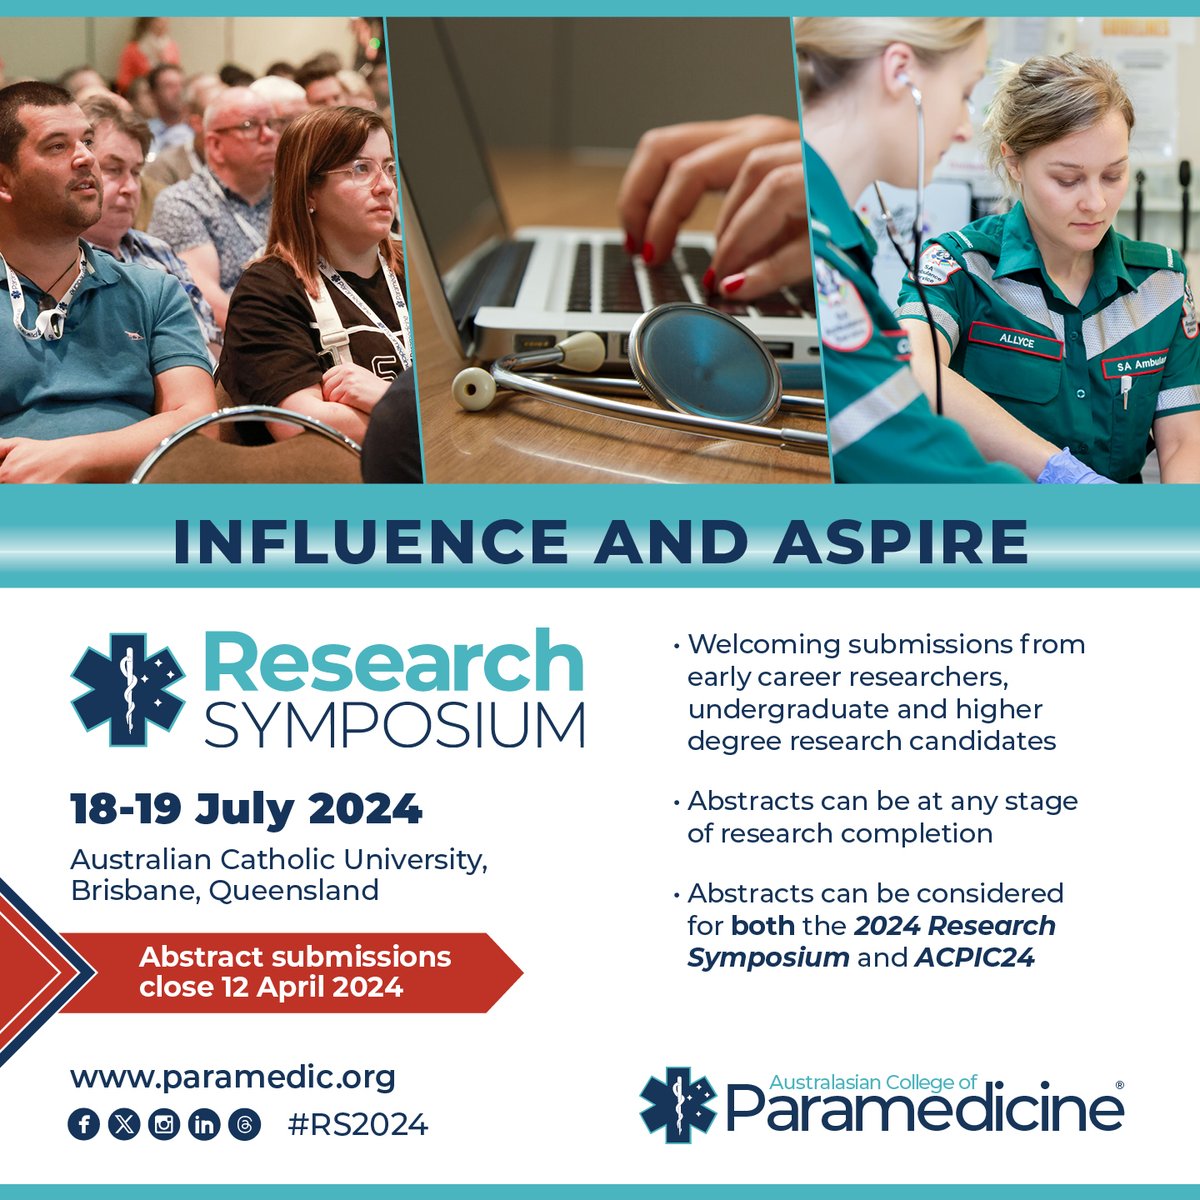 We've extended the deadline for Research Abstract submissions until THIS Friday 12 April. Abstracts can be considered for our Brisbane Research Symposium and our Sydney ACP International Conference! 🔗 bit.ly/Research-Abstr… #ParaResearch #ACPIC24